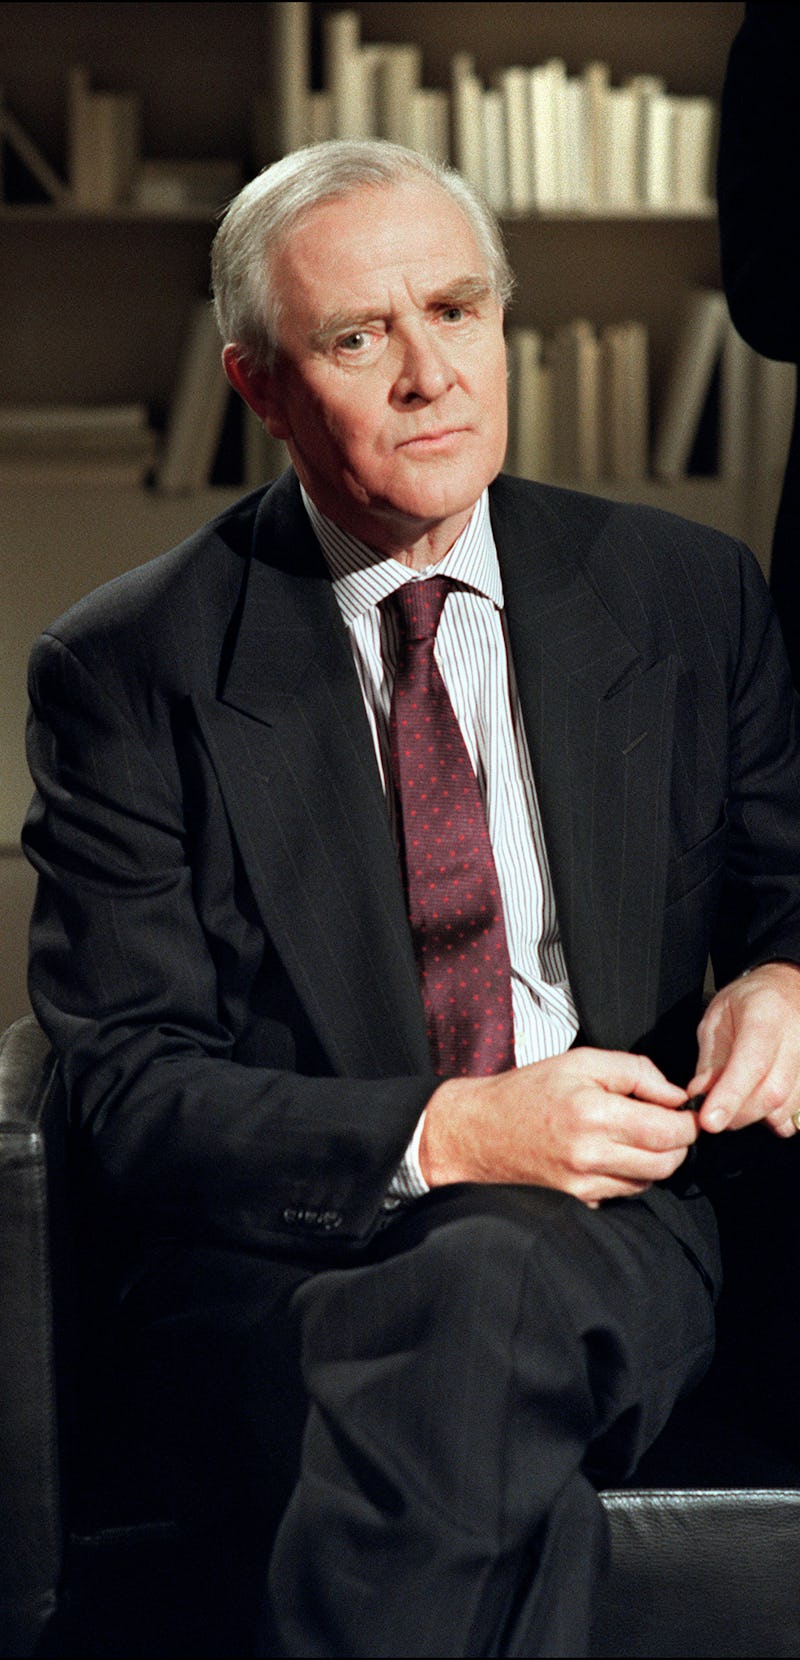 John le Carre in a black suit, striped shirt and maroon tie